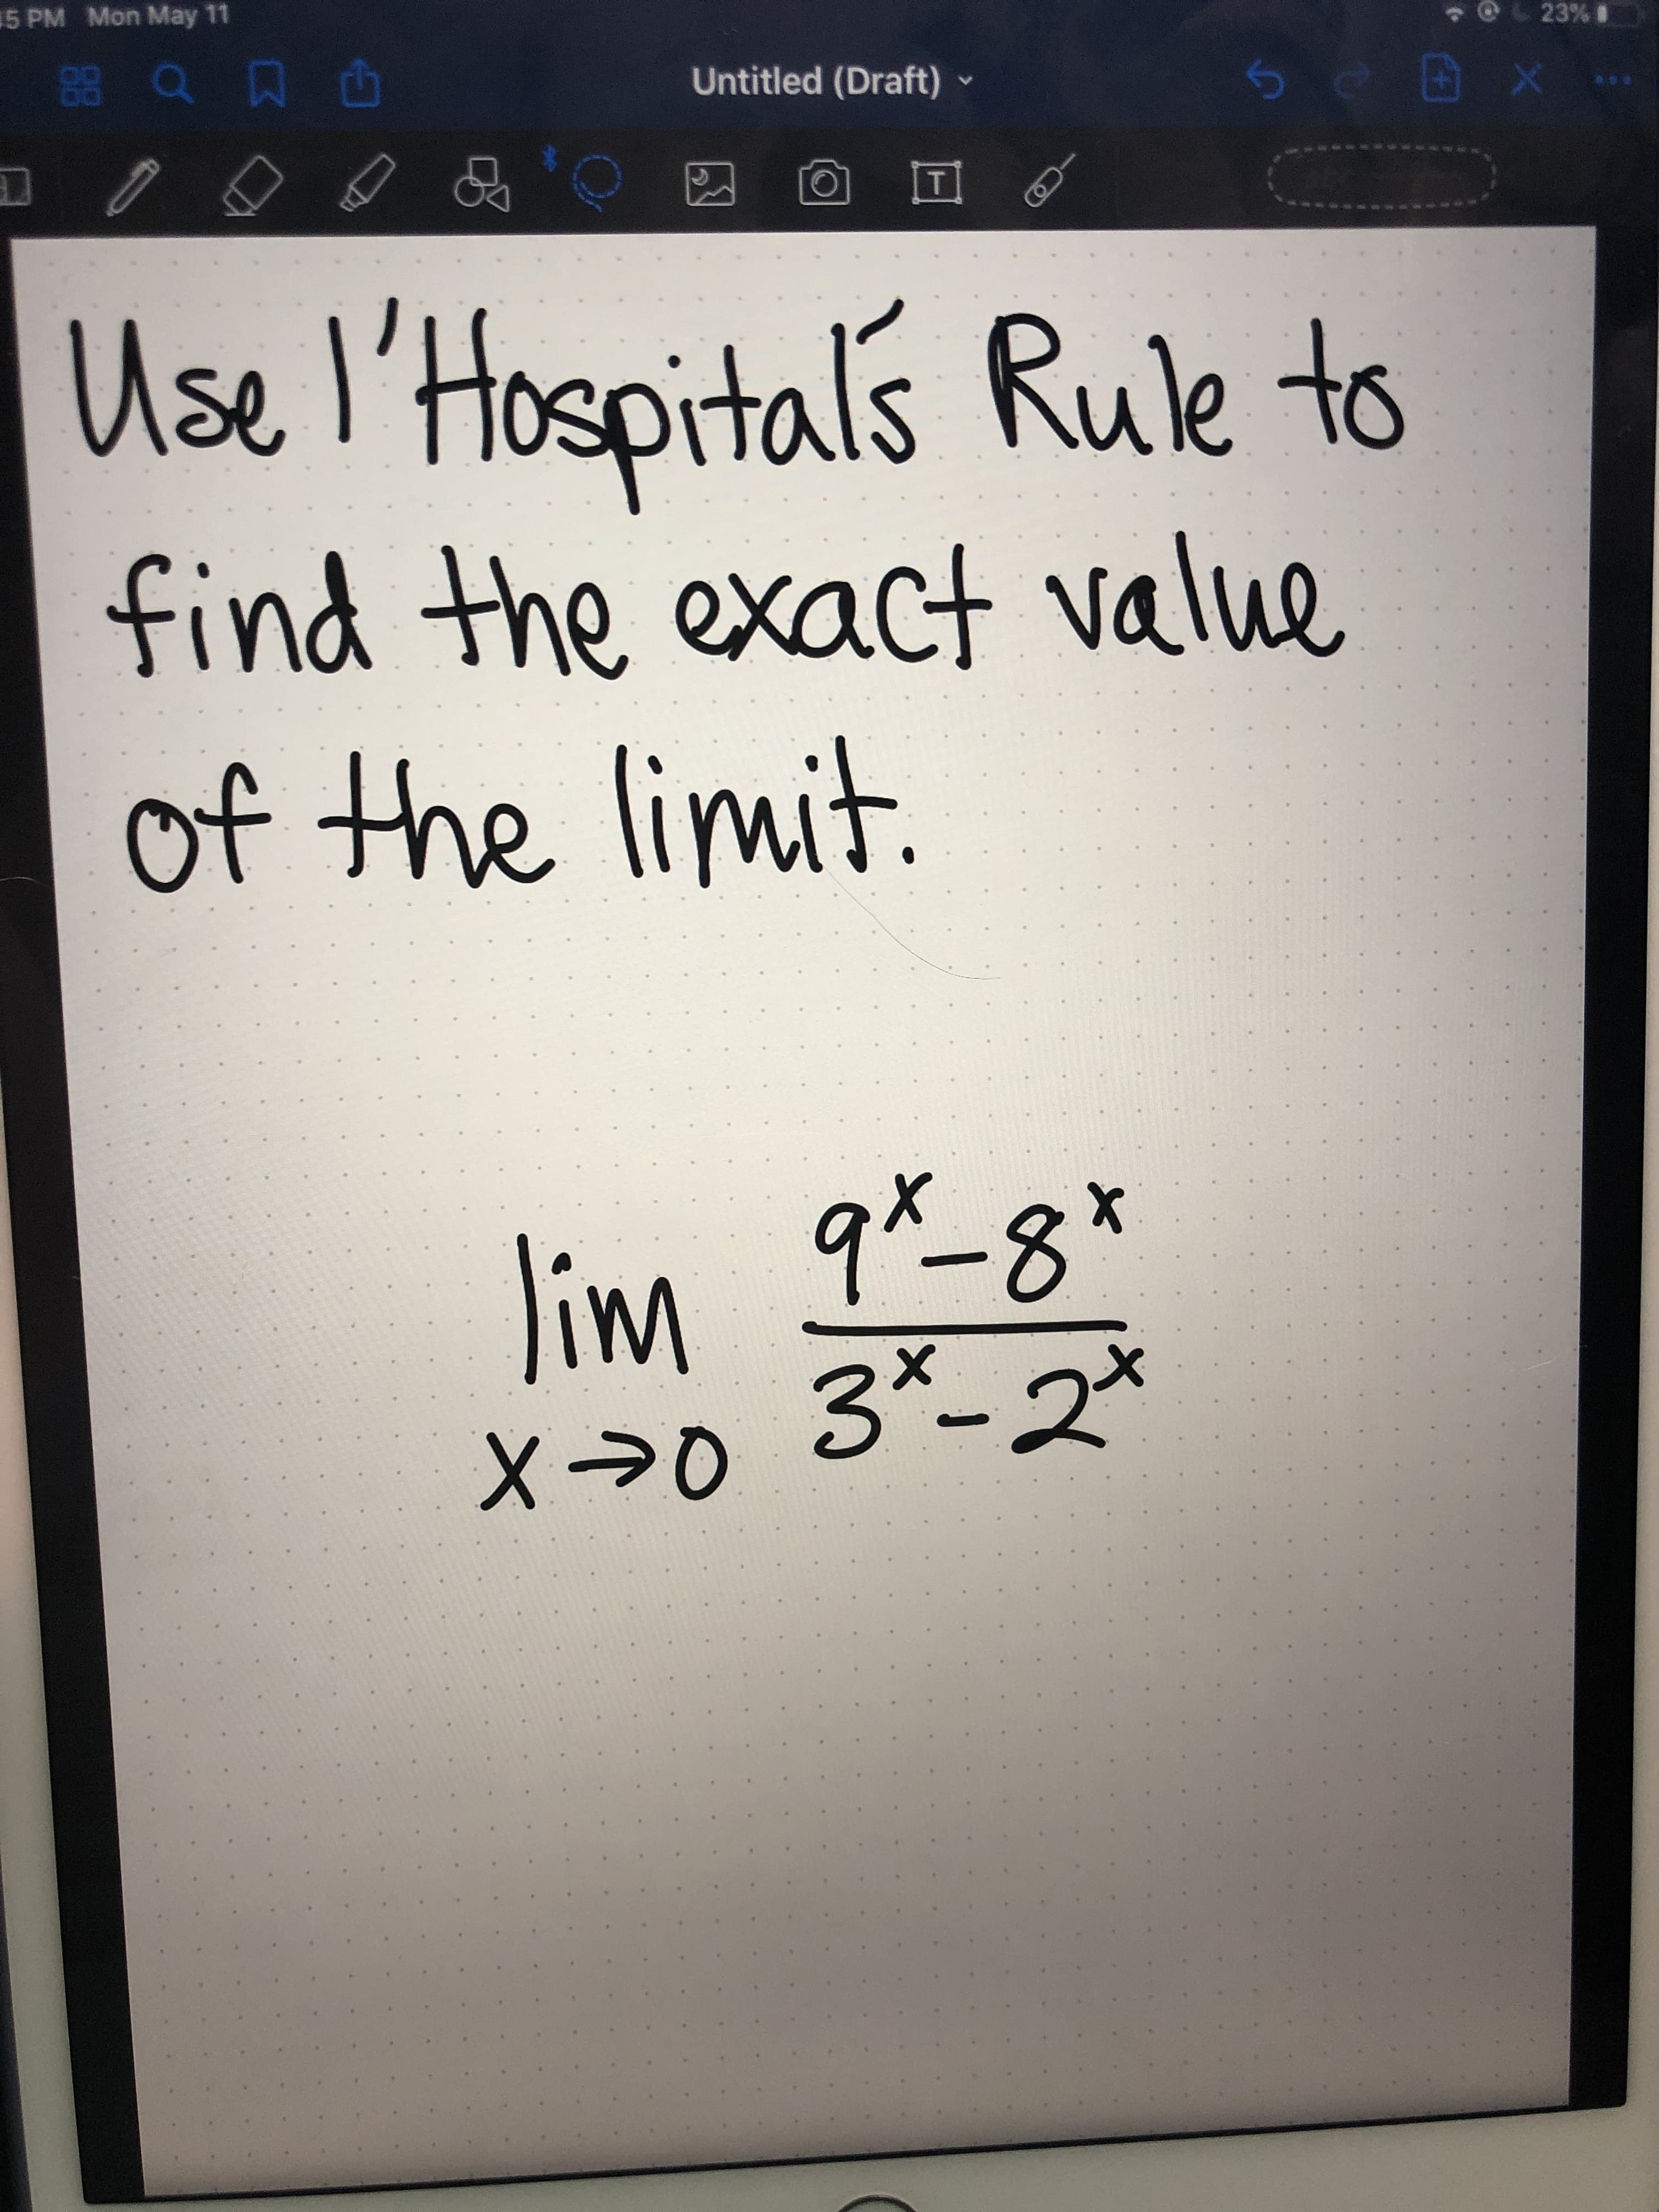 l'Hos
pital's Rule to
nd the exact value
the limit.
lim 9*-8*
3*-2*
